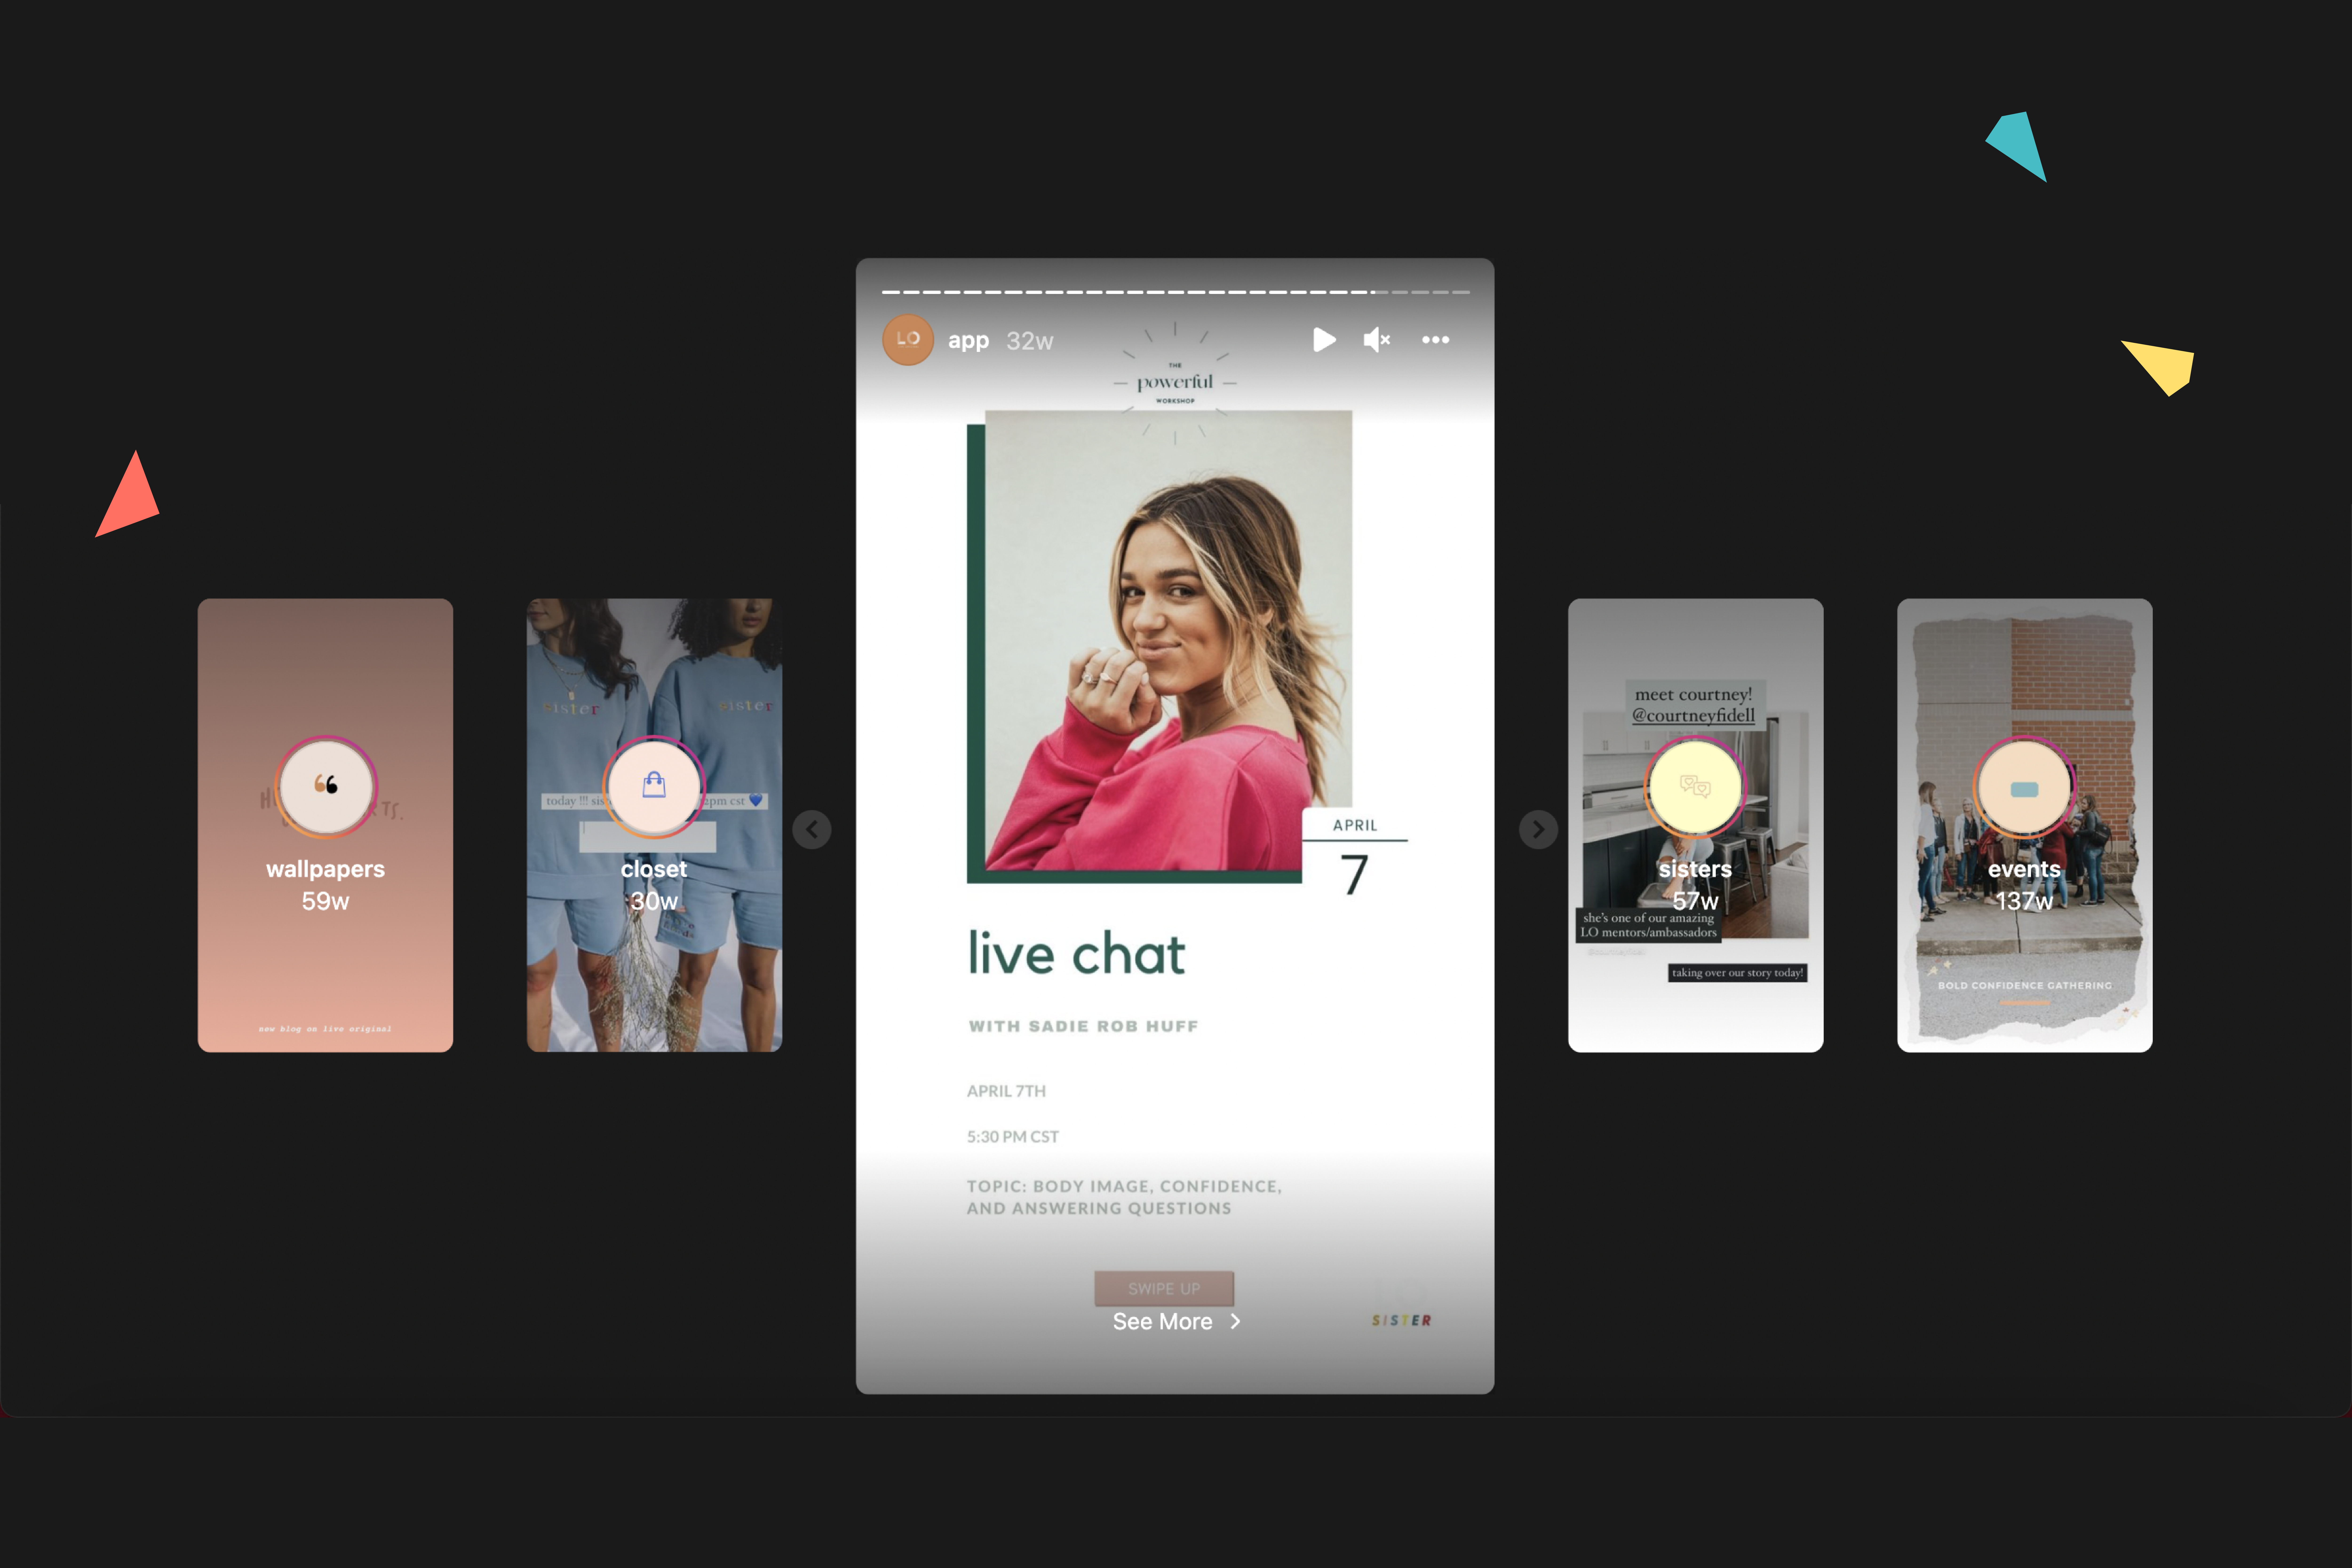 Live chat events within the LO sister app 